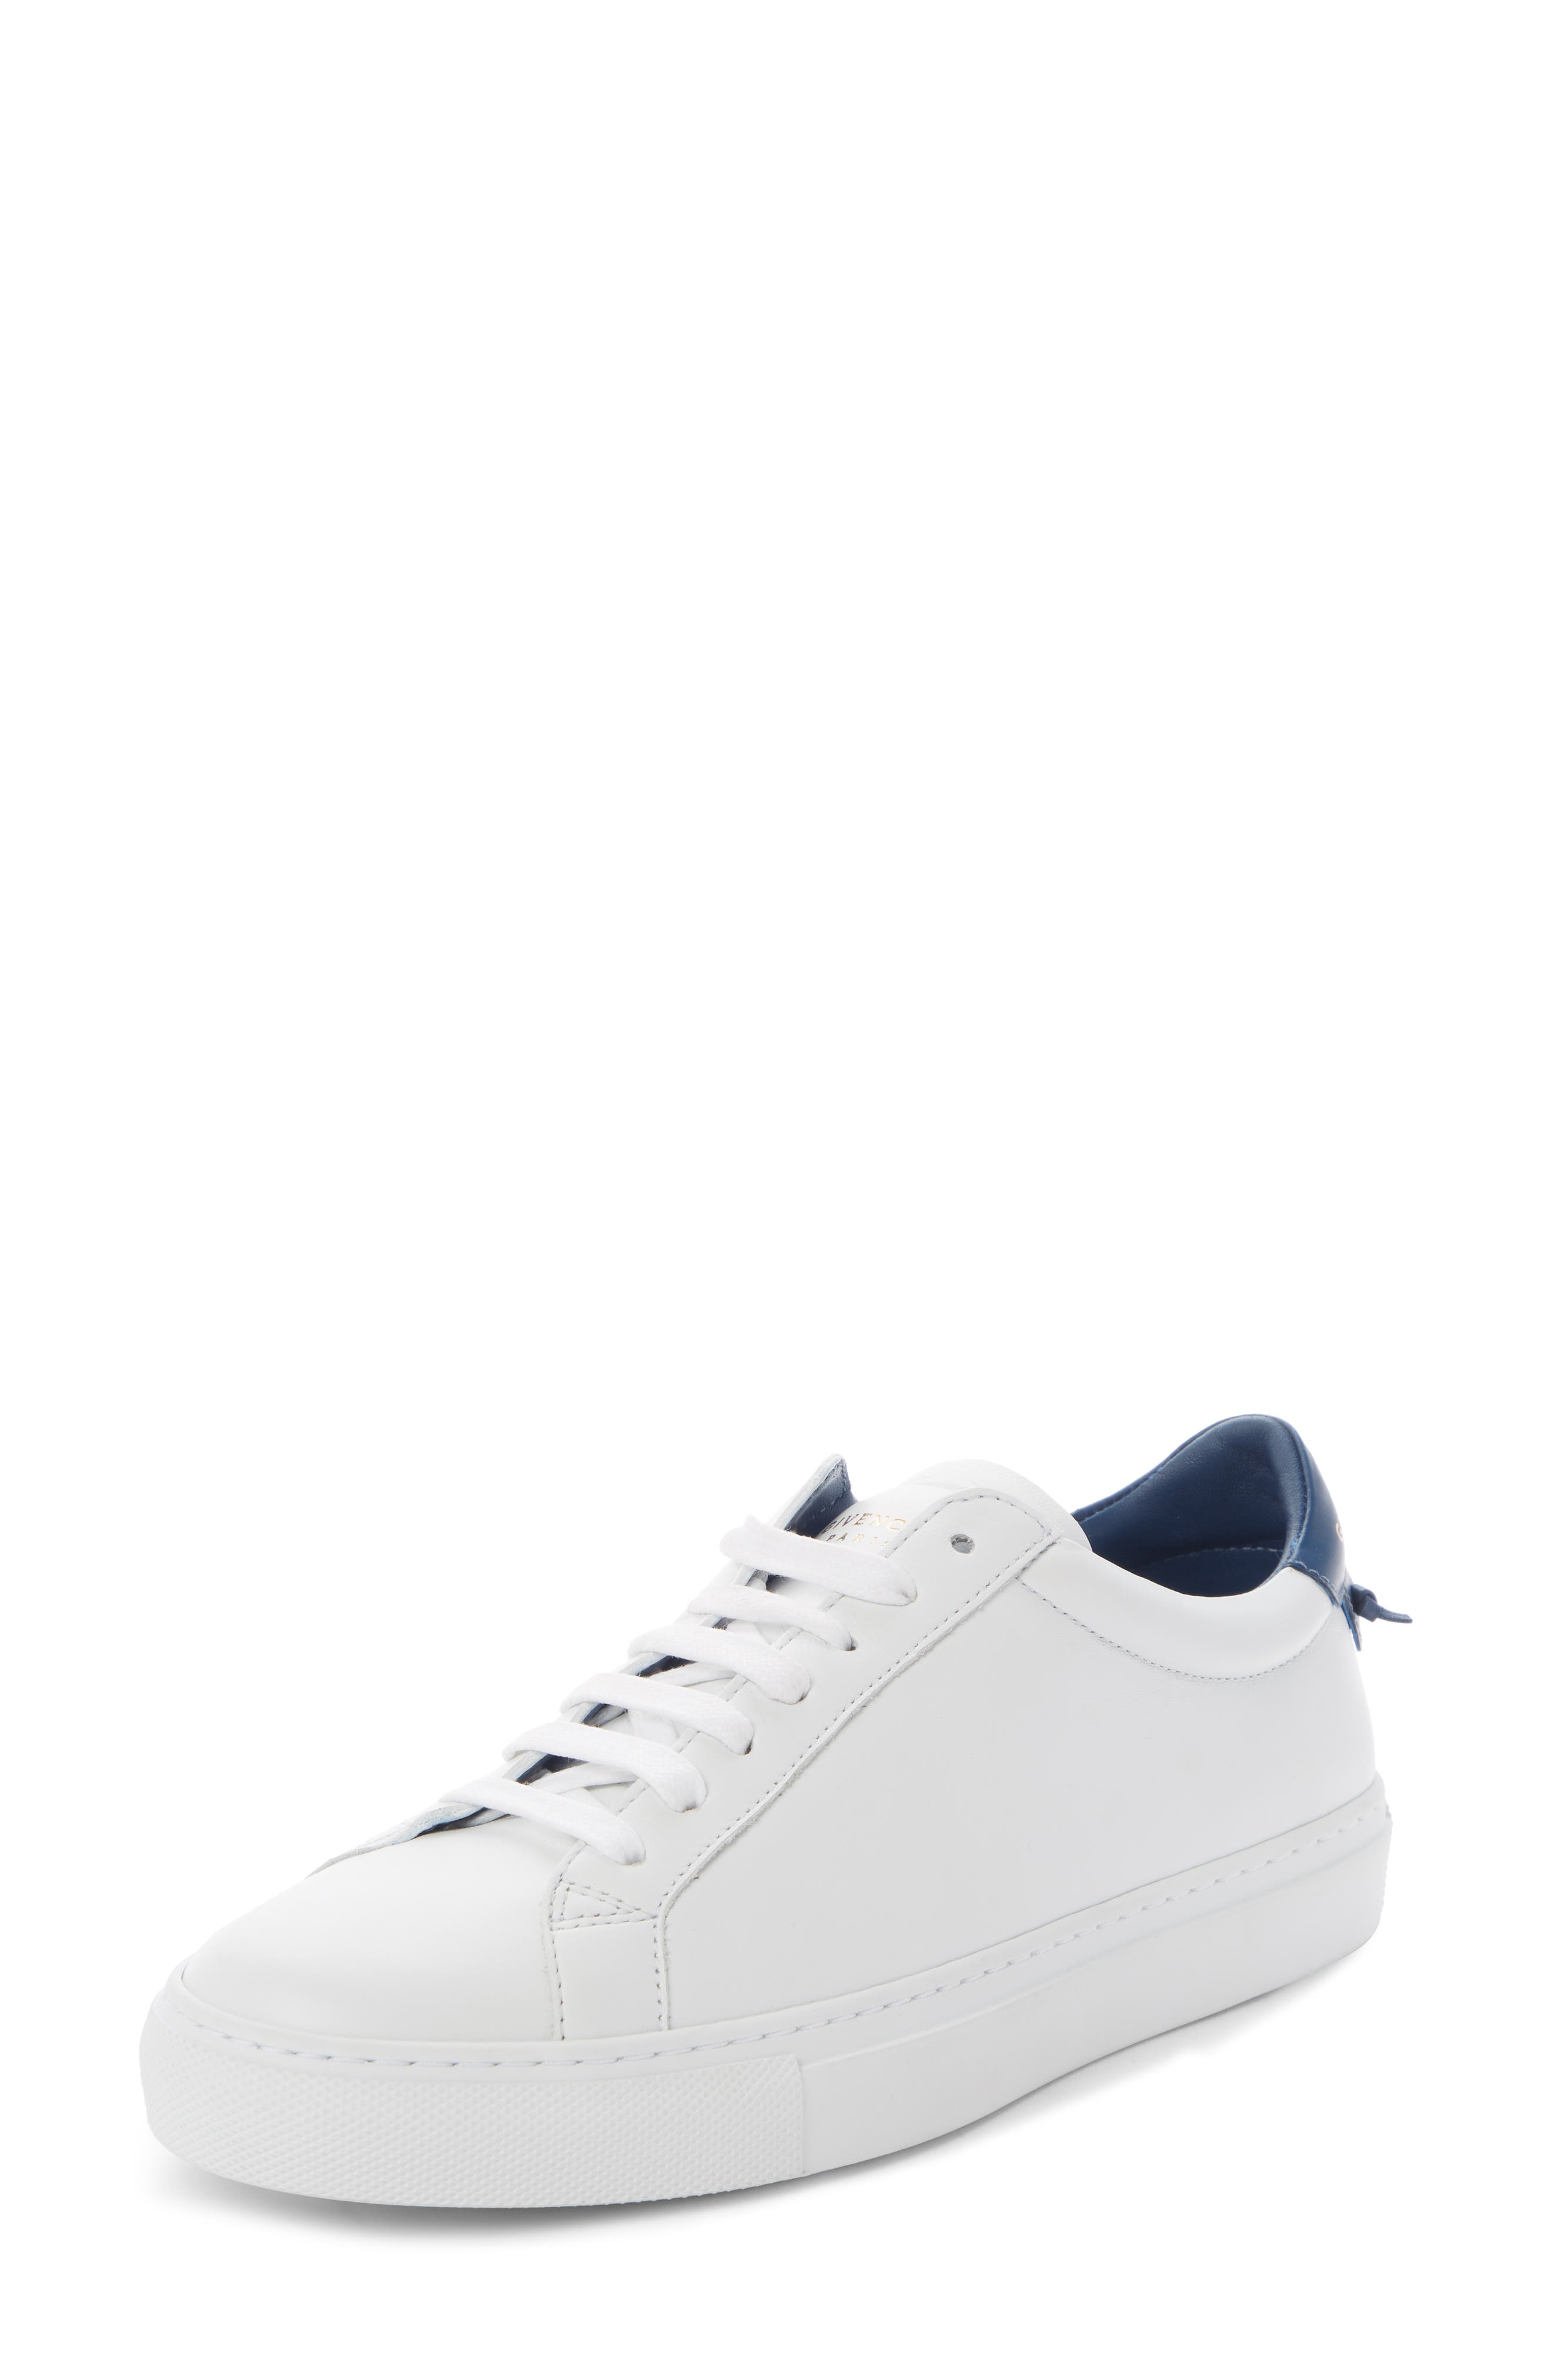 givenchy urban street sneakers womens